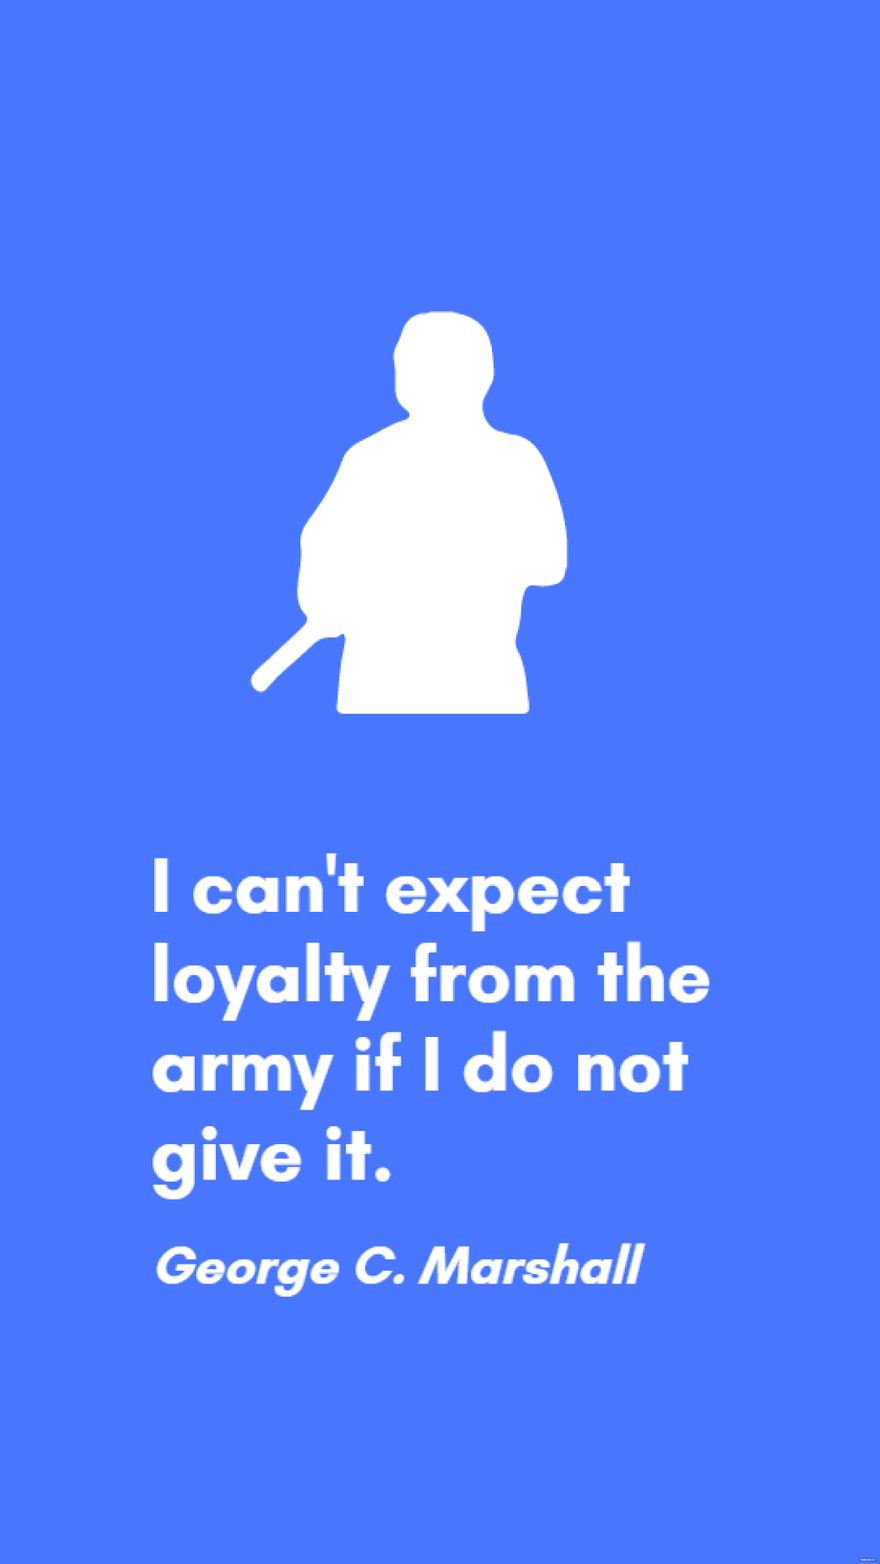 George C. Marshall - I can't expect loyalty from the army if I do not give it.